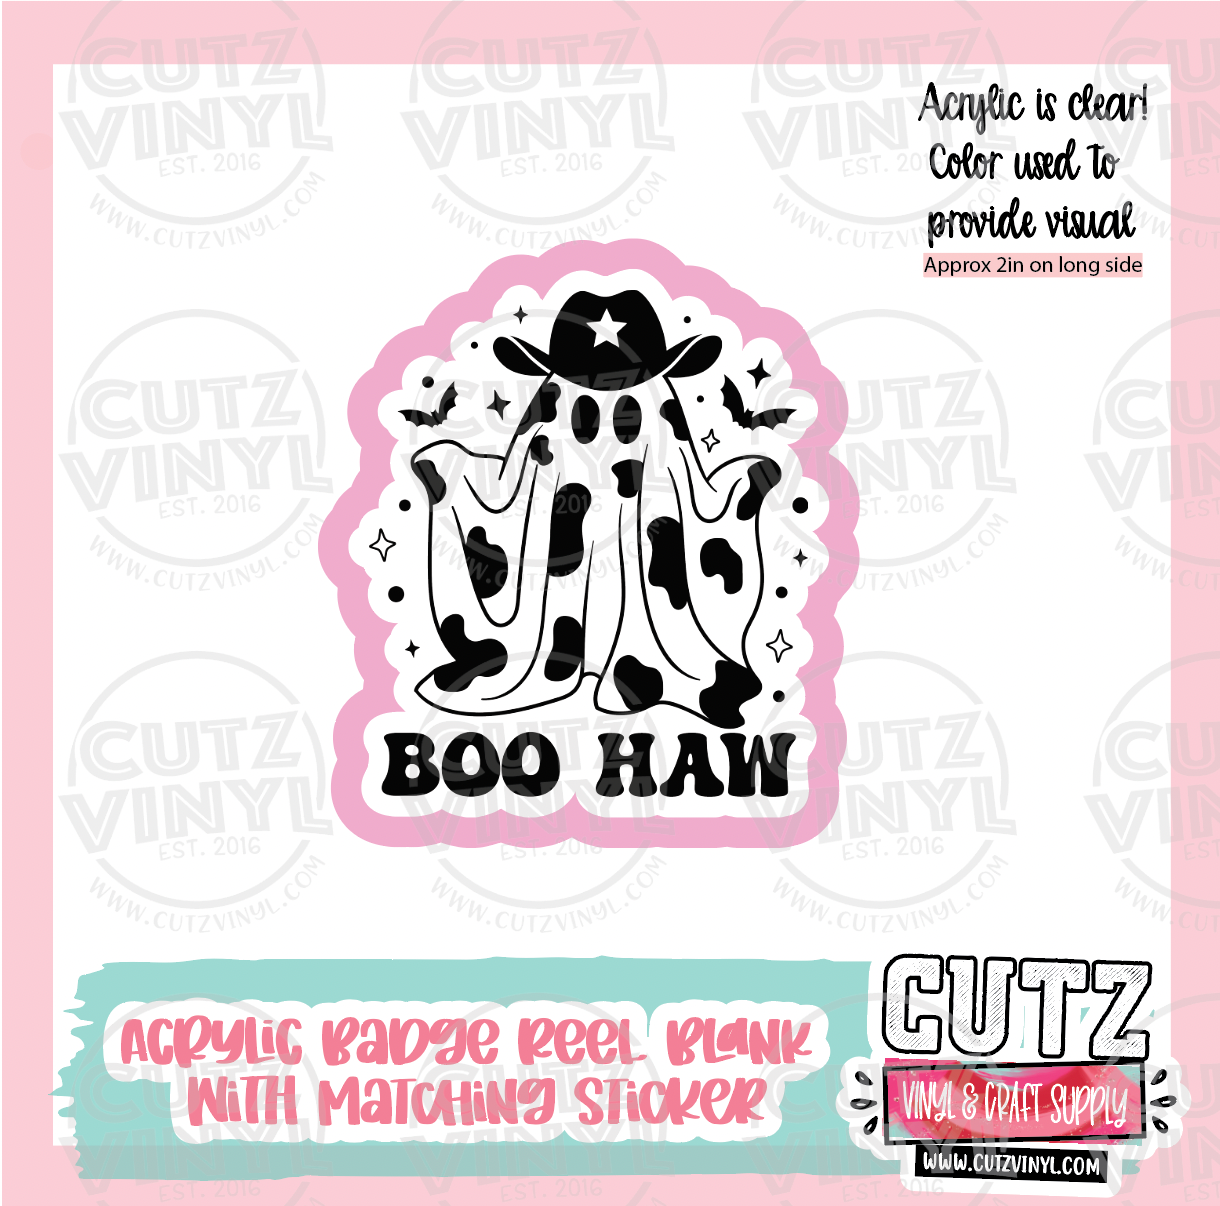 Cow Boy BooHaw Acrylic Badge Reel Blank and Matching Sticker